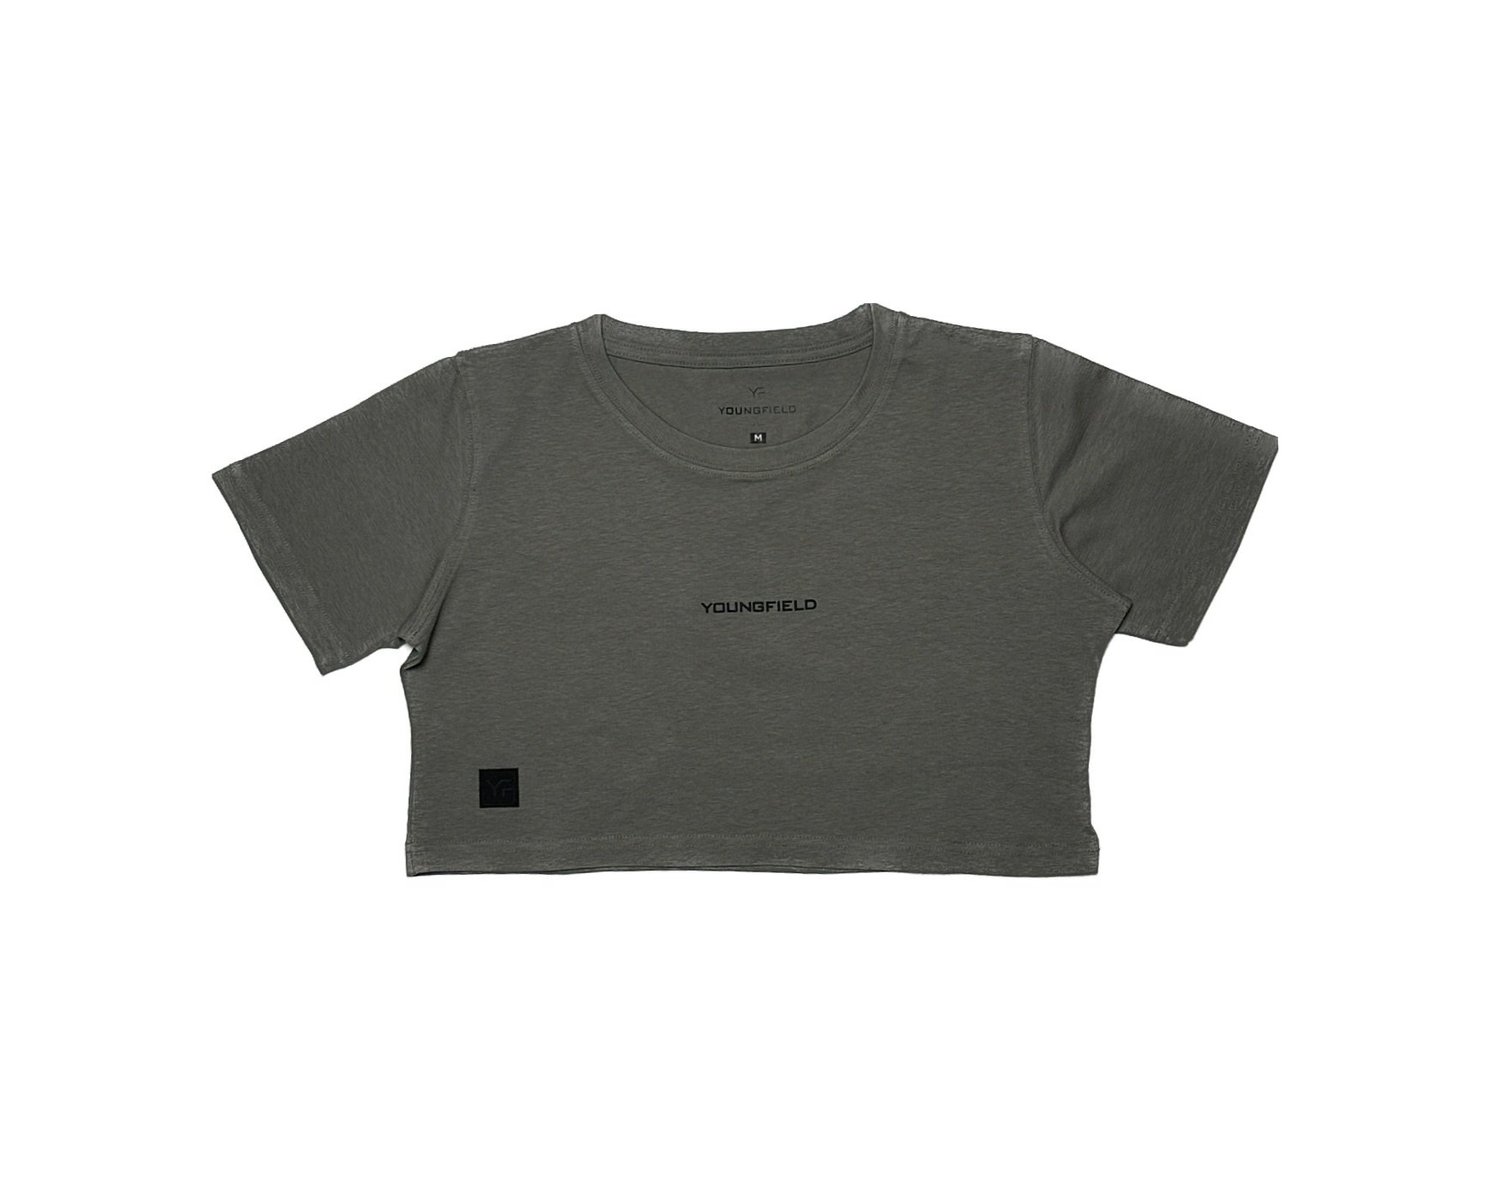 Youngfield Women's Cropped Tee: Elevate Your Style with Confidence, YOUNGFIELD